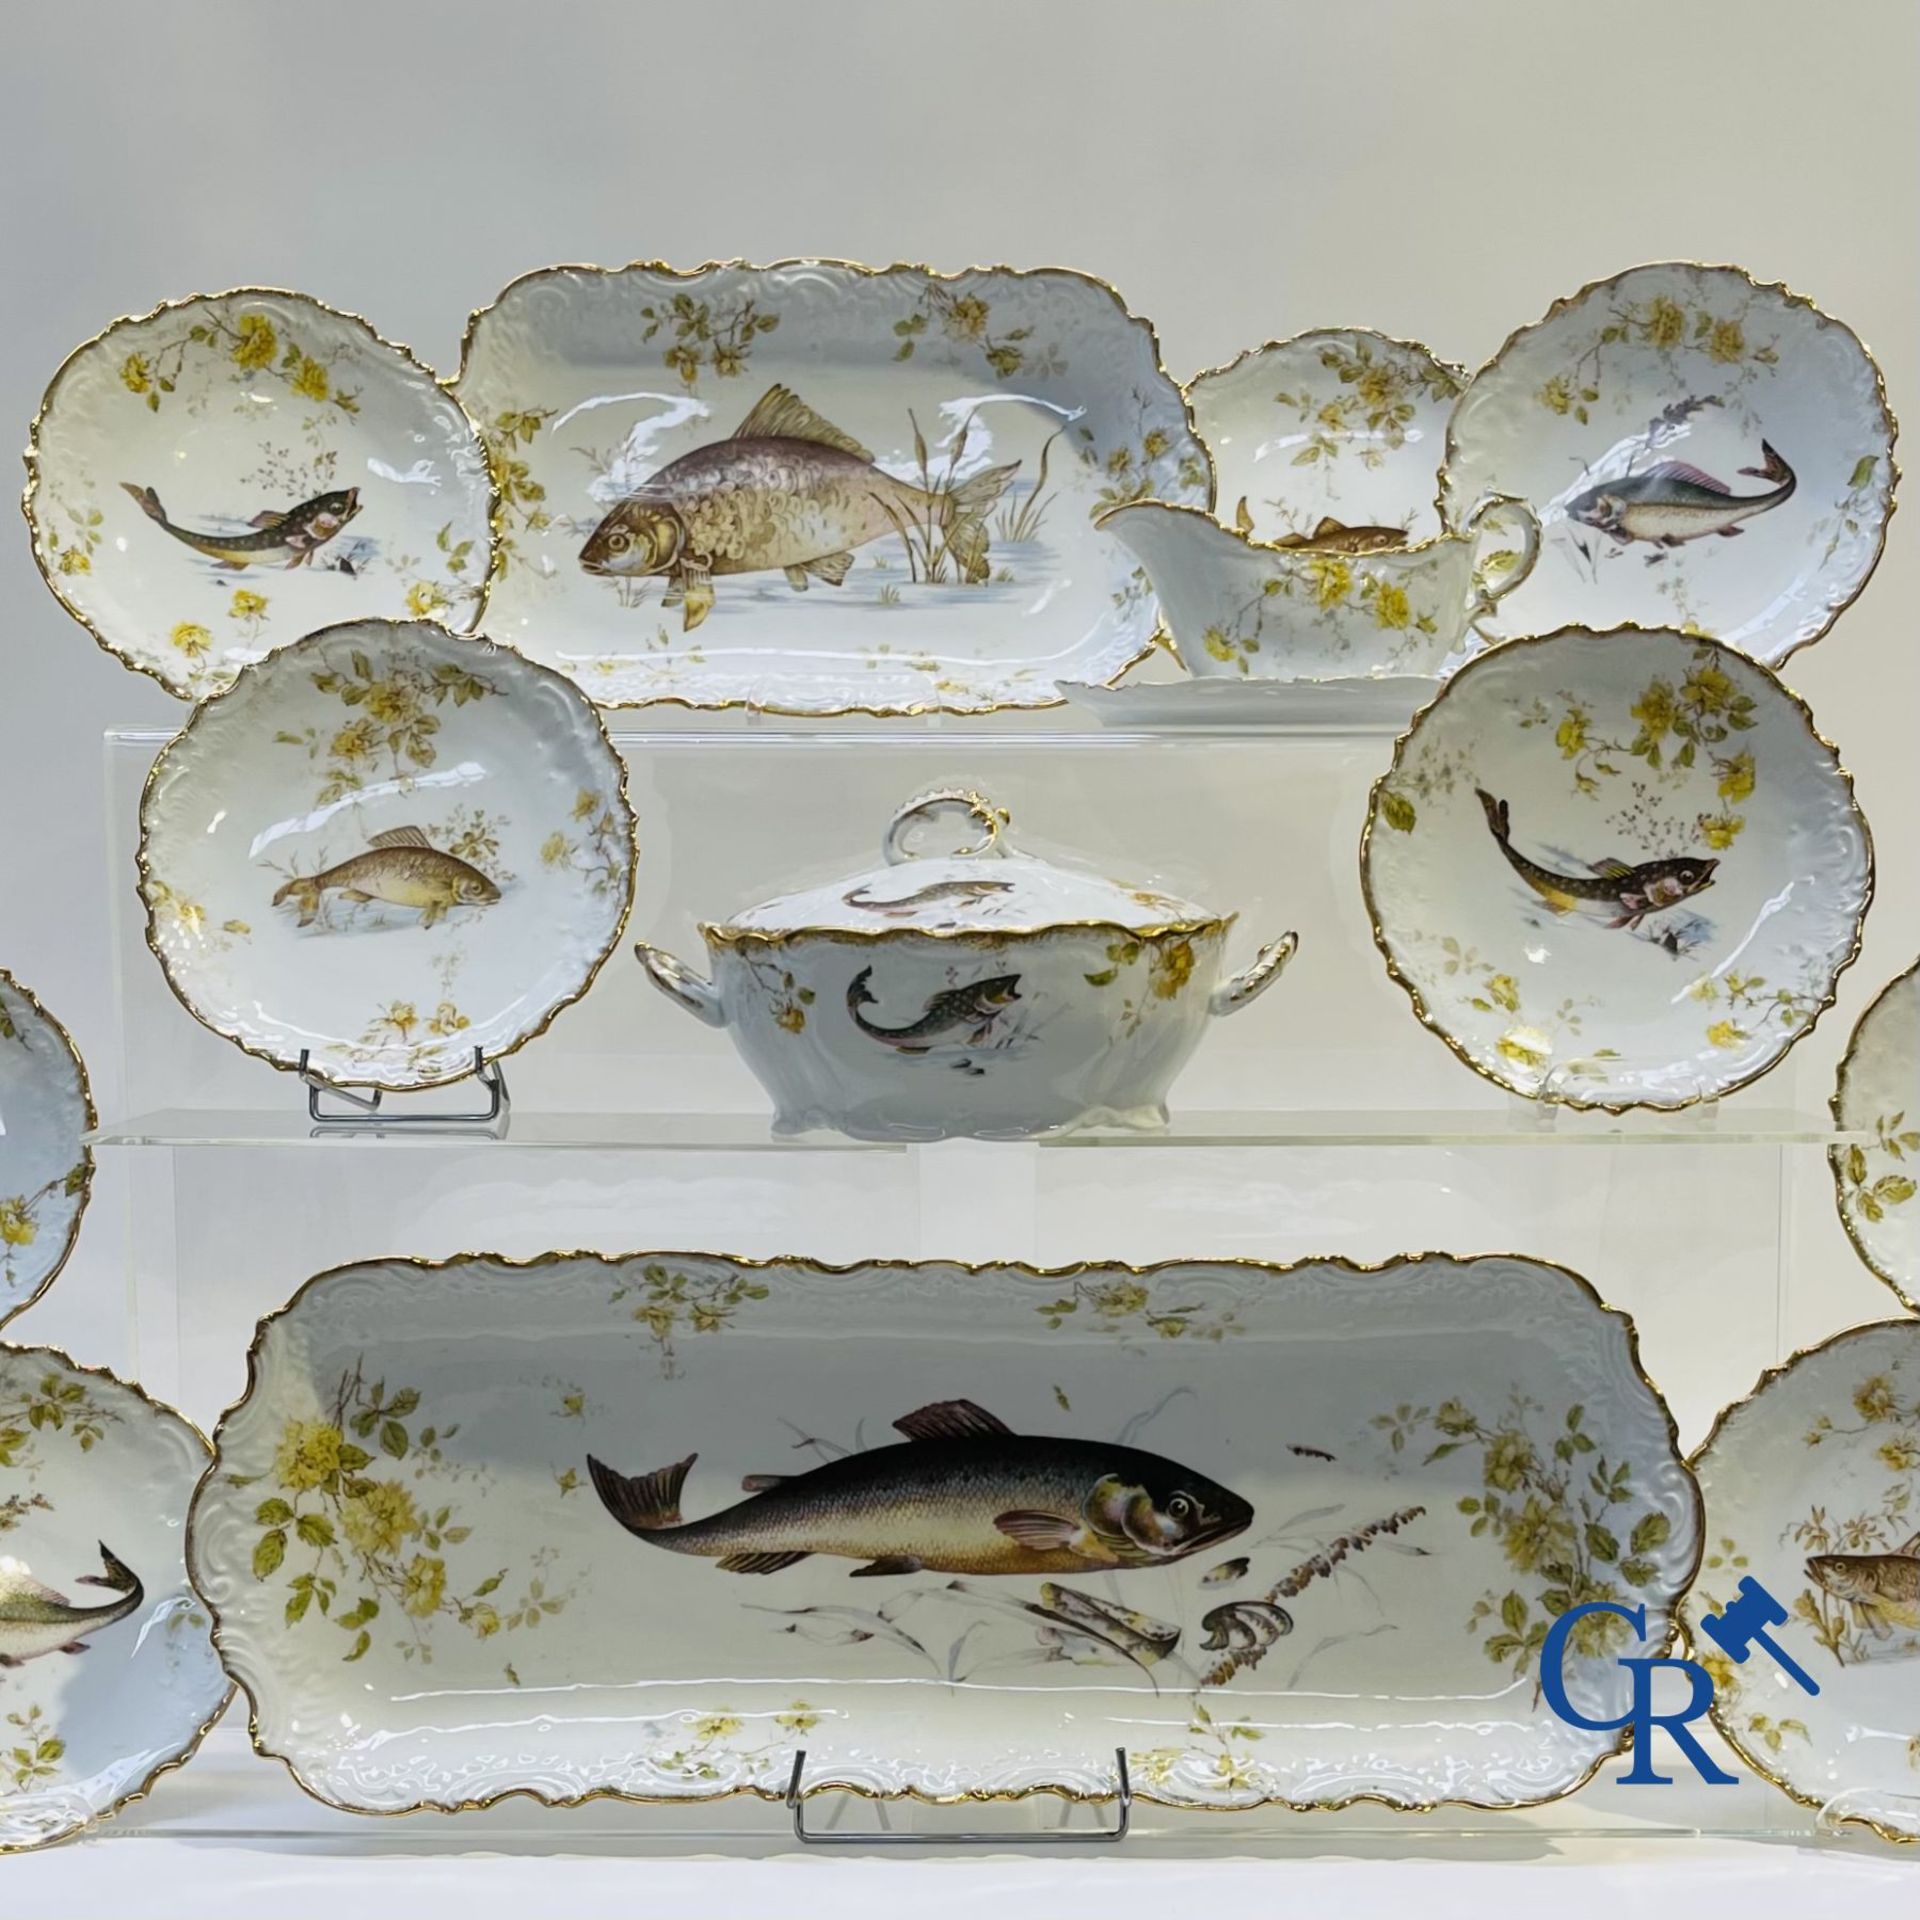 Extraordinary tableware in Brussels porcelain with a theme of freshwater fish.